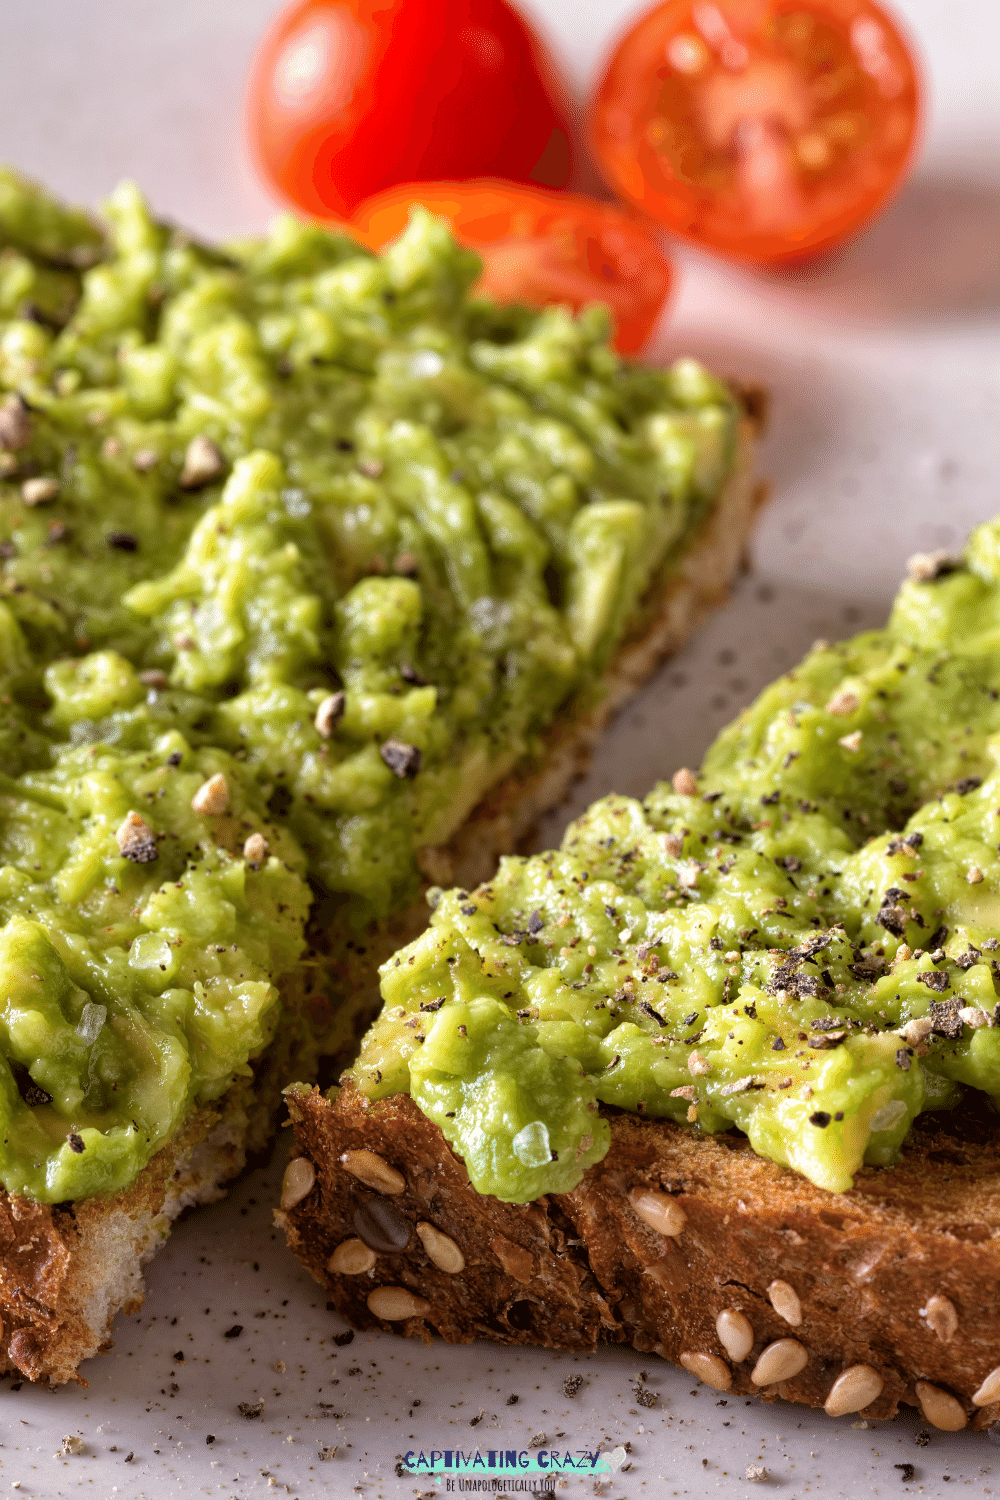 delicious avocado on a toast makes a wonderful, healthy Valentine breakfast